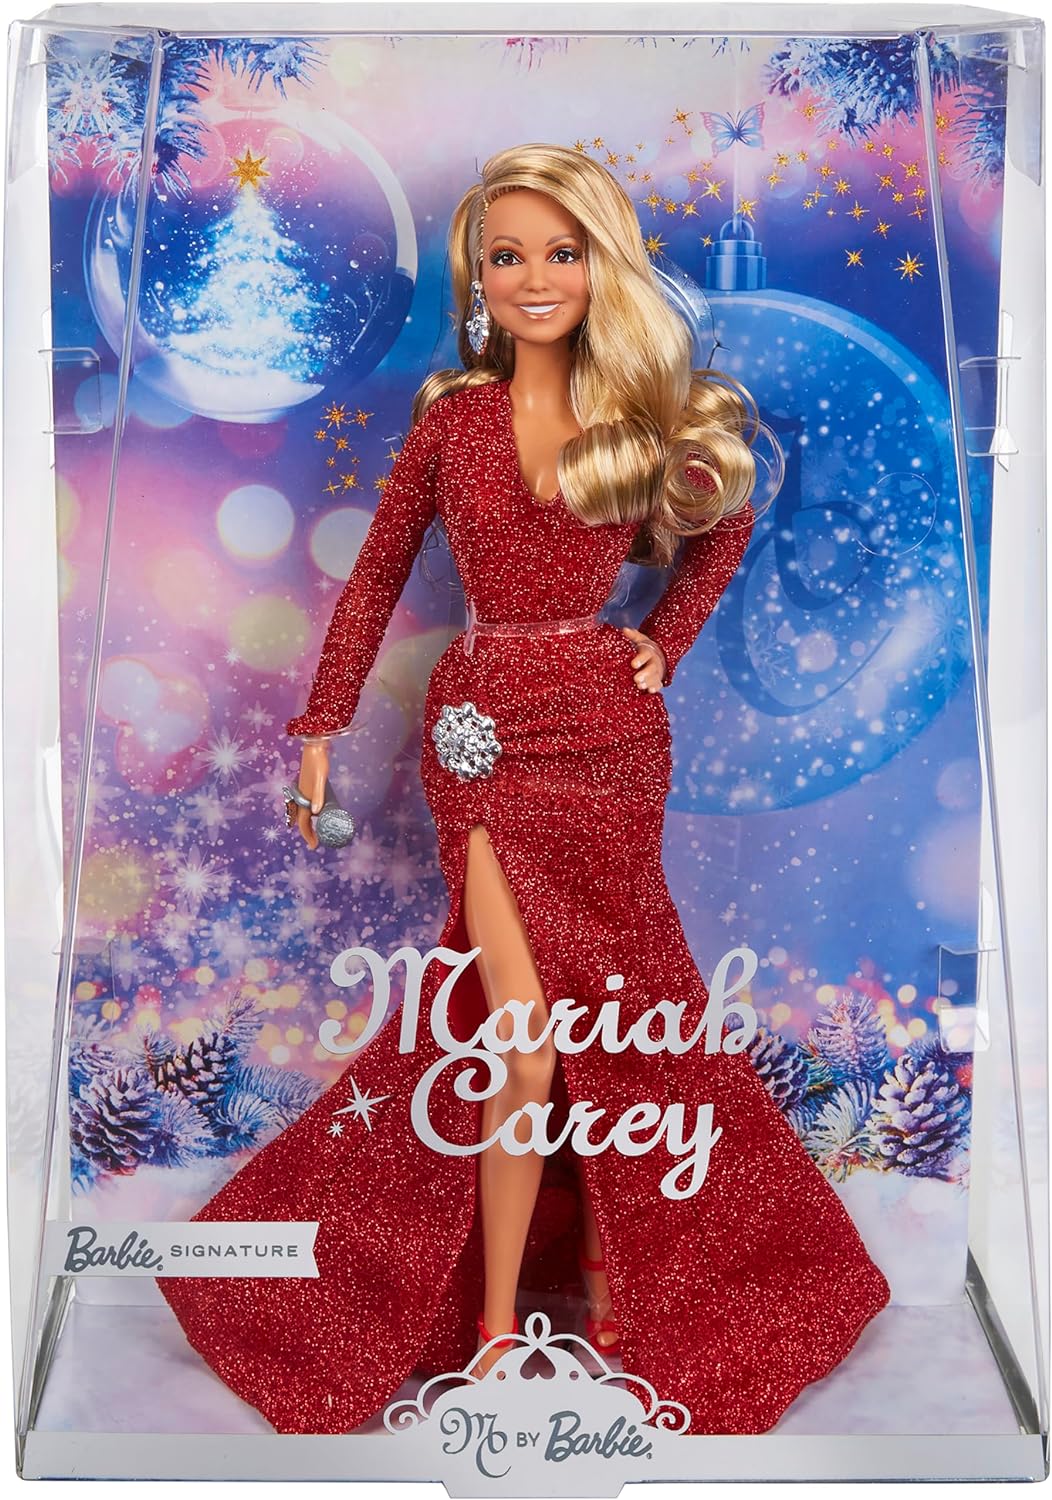 Barbie Signature Mariah Carey Holiday Celebration Collector Doll in Glittery Red Gown $27 + Free Shipping